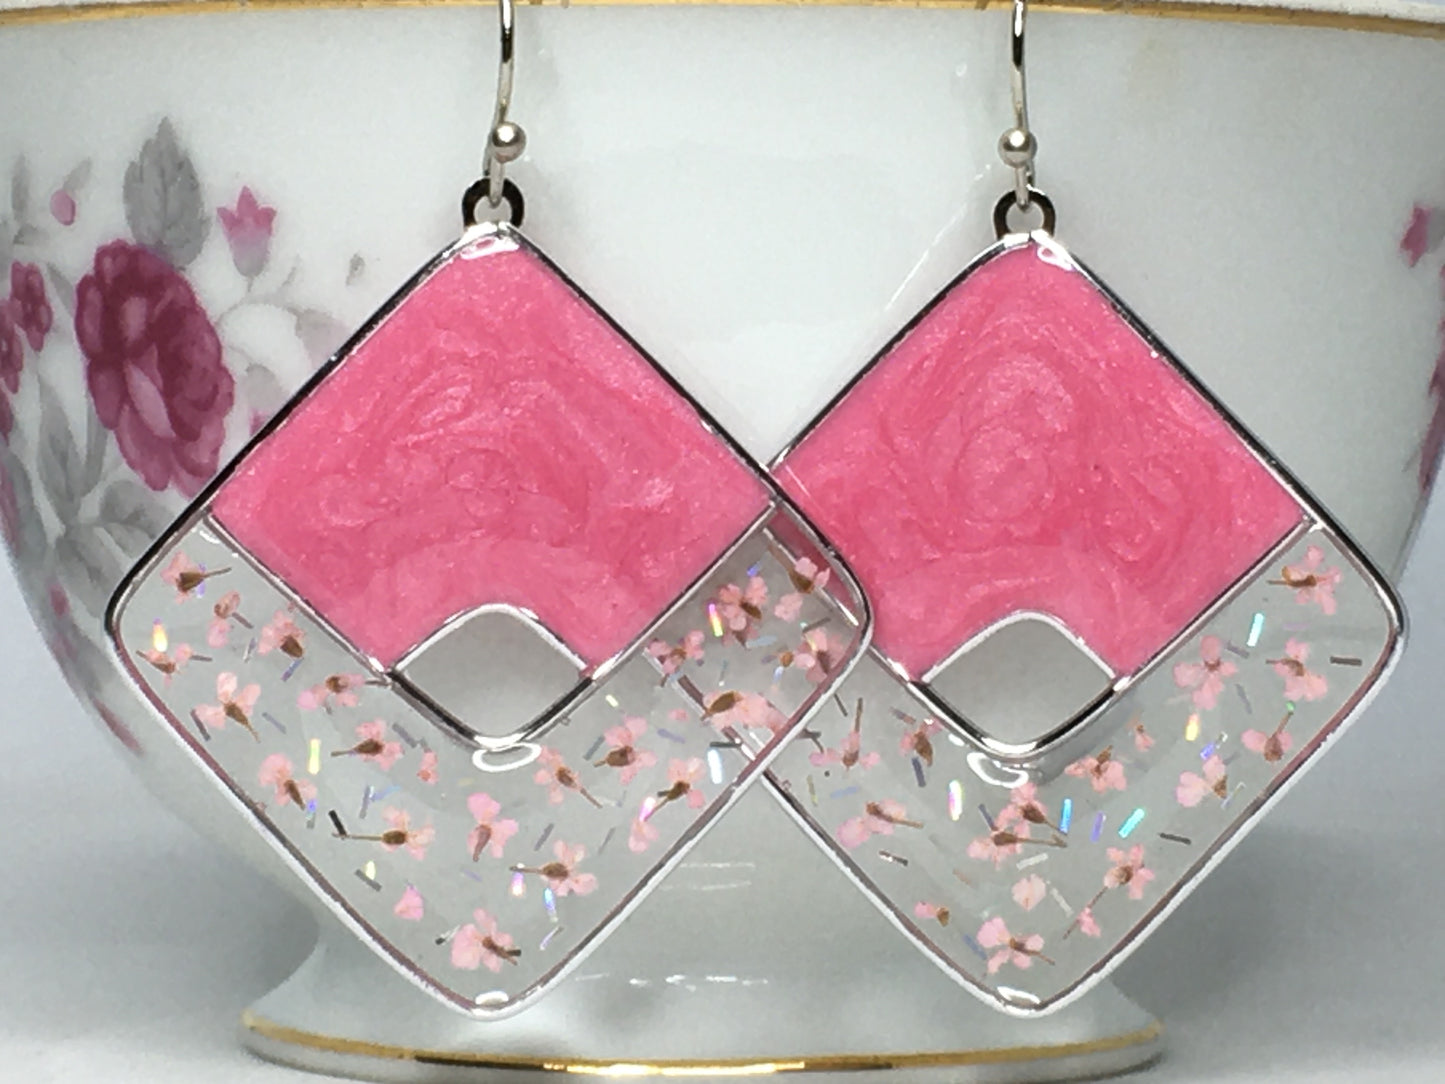 Frosted pink earrings with pink pressed flowers